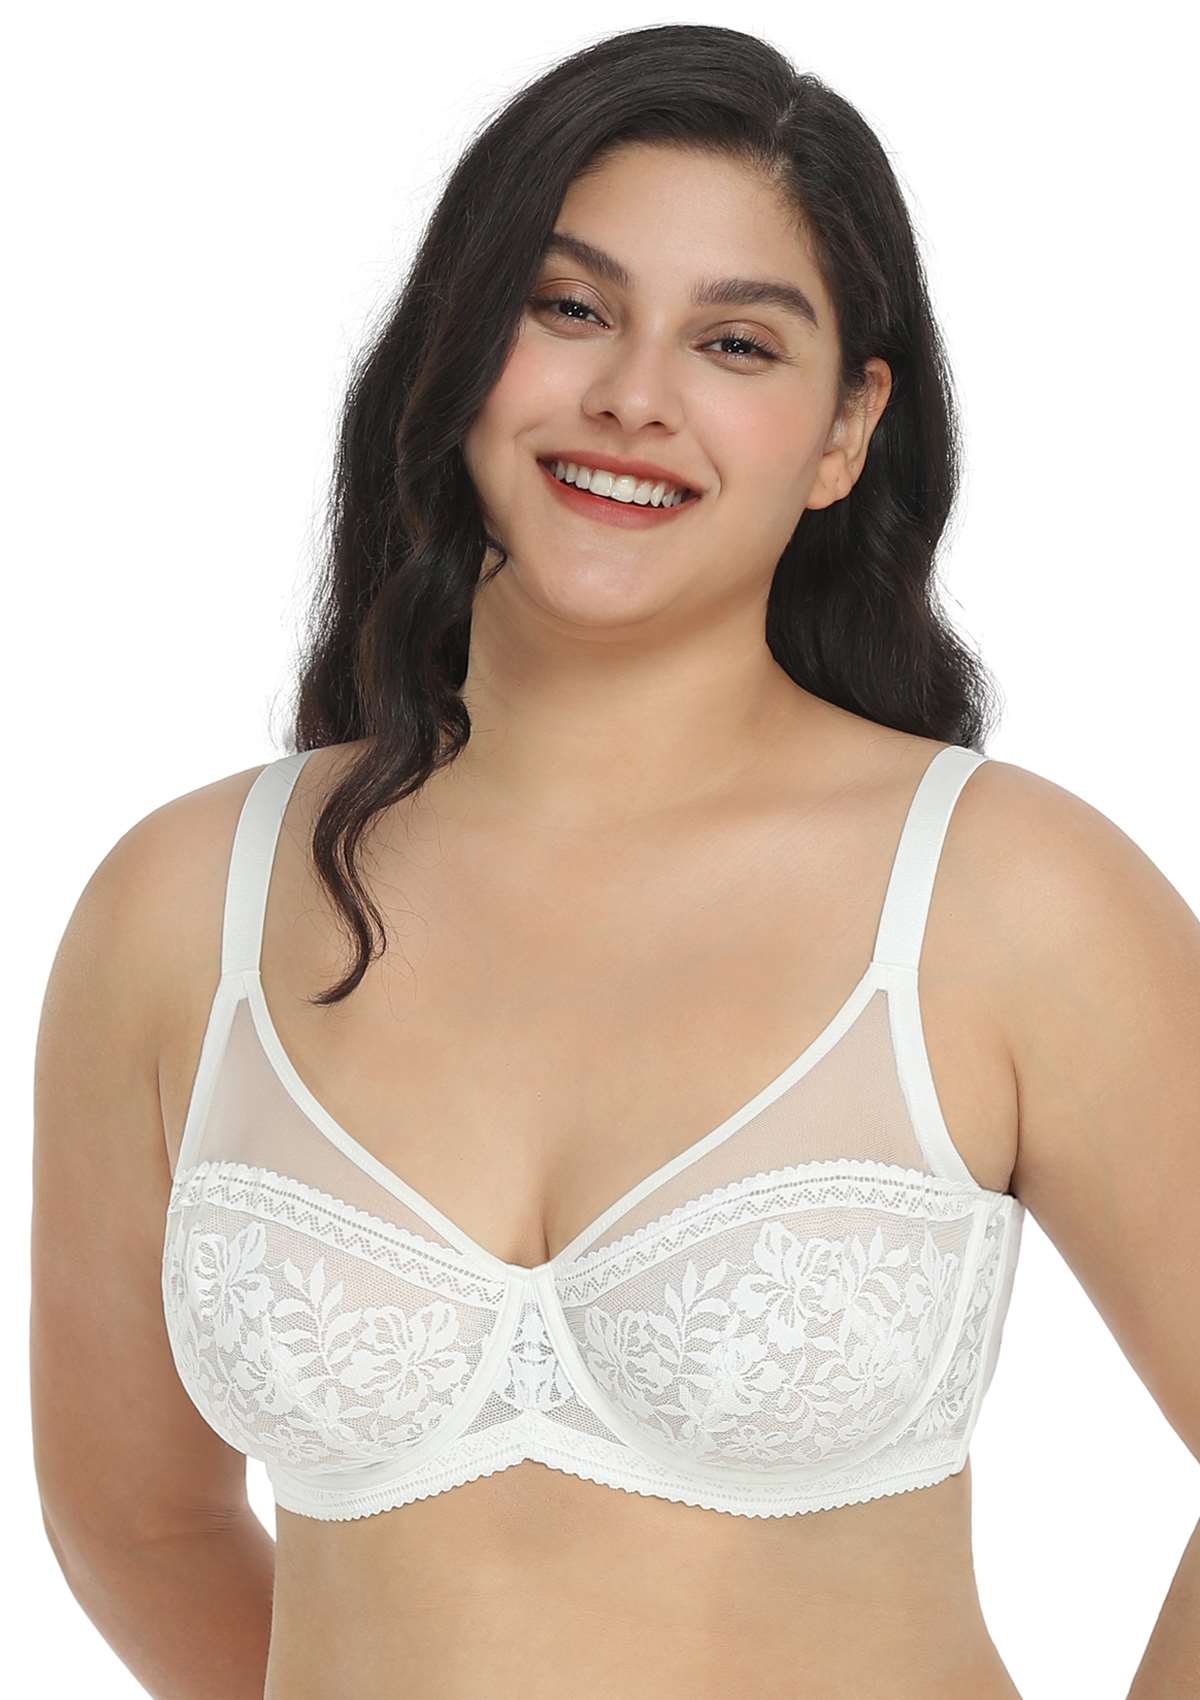 HSIA Gladioli Lace Mesh Minimizing Unlined Underwire Bra For Fuller Busts - White / 44 / DDD/F